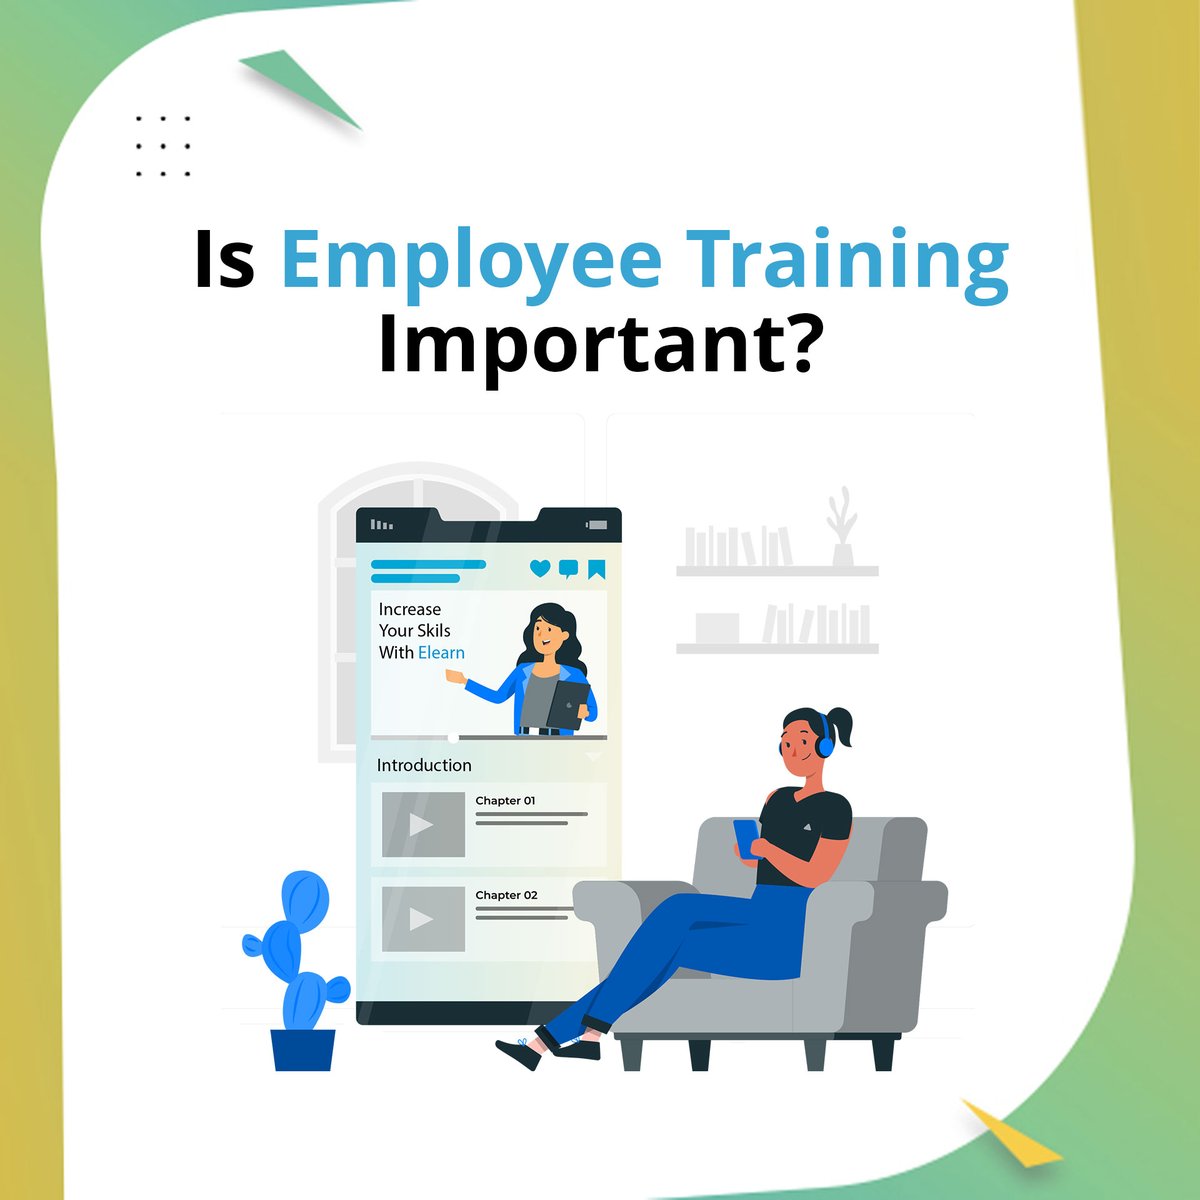 Gain a personal perspective on how employee training fuels growth and unlocks potential.

Click it to known more>>bit.ly/427eXnv

#ProductivityBoost #EfficientTraining   #CorporateTraining #FutureOfWork #businessowners #business #manufacturingindustry #retailindustry